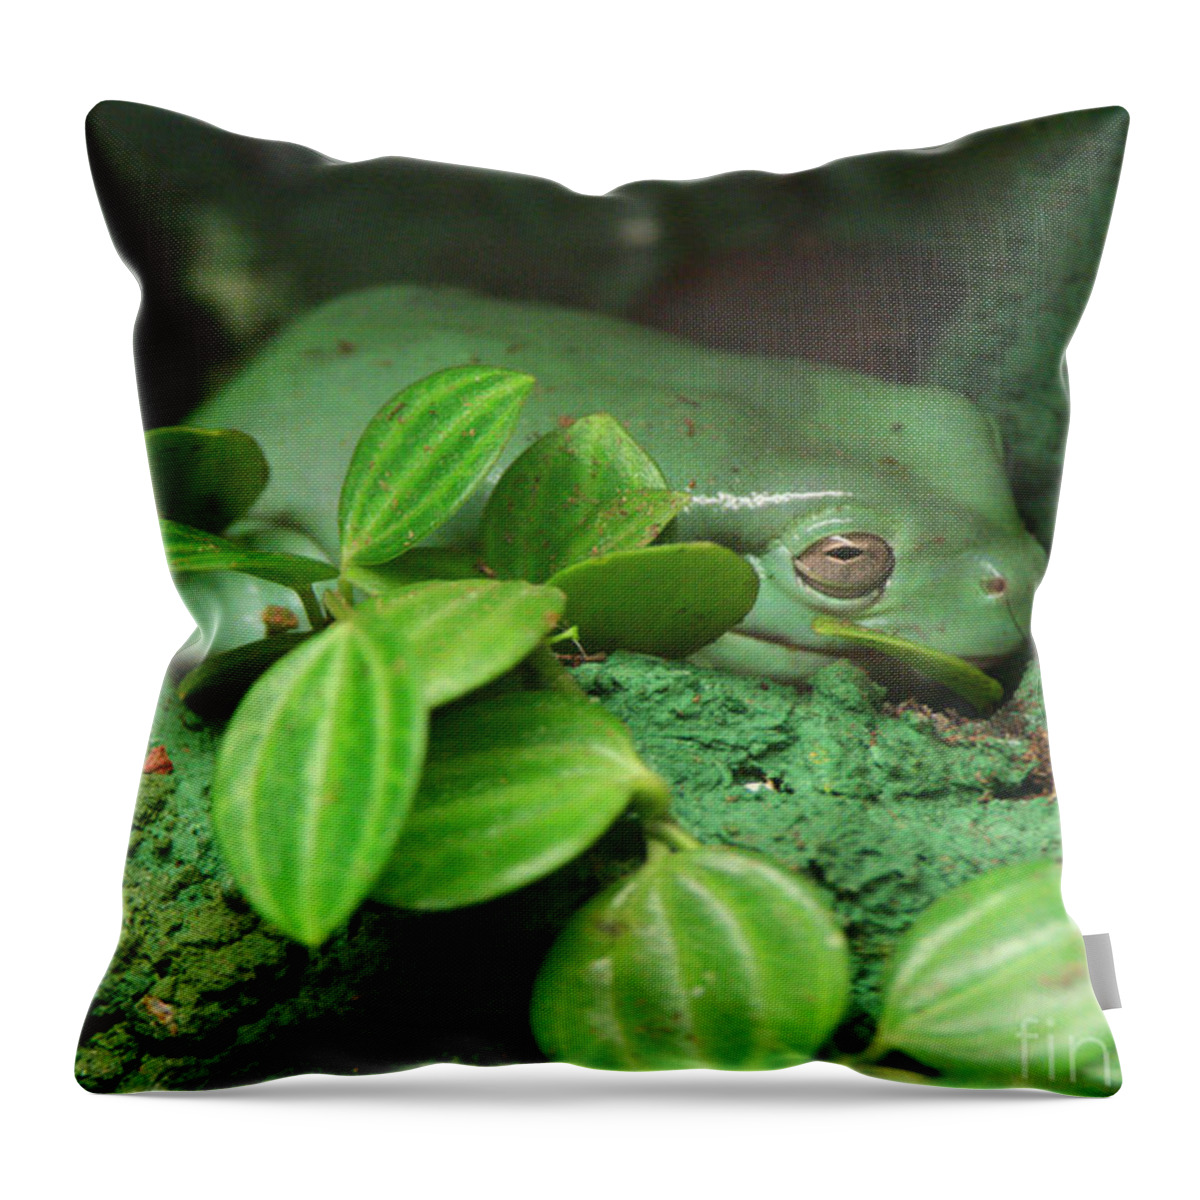 Green Frog Throw Pillow featuring the photograph Amphibian Frog by Doc Braham